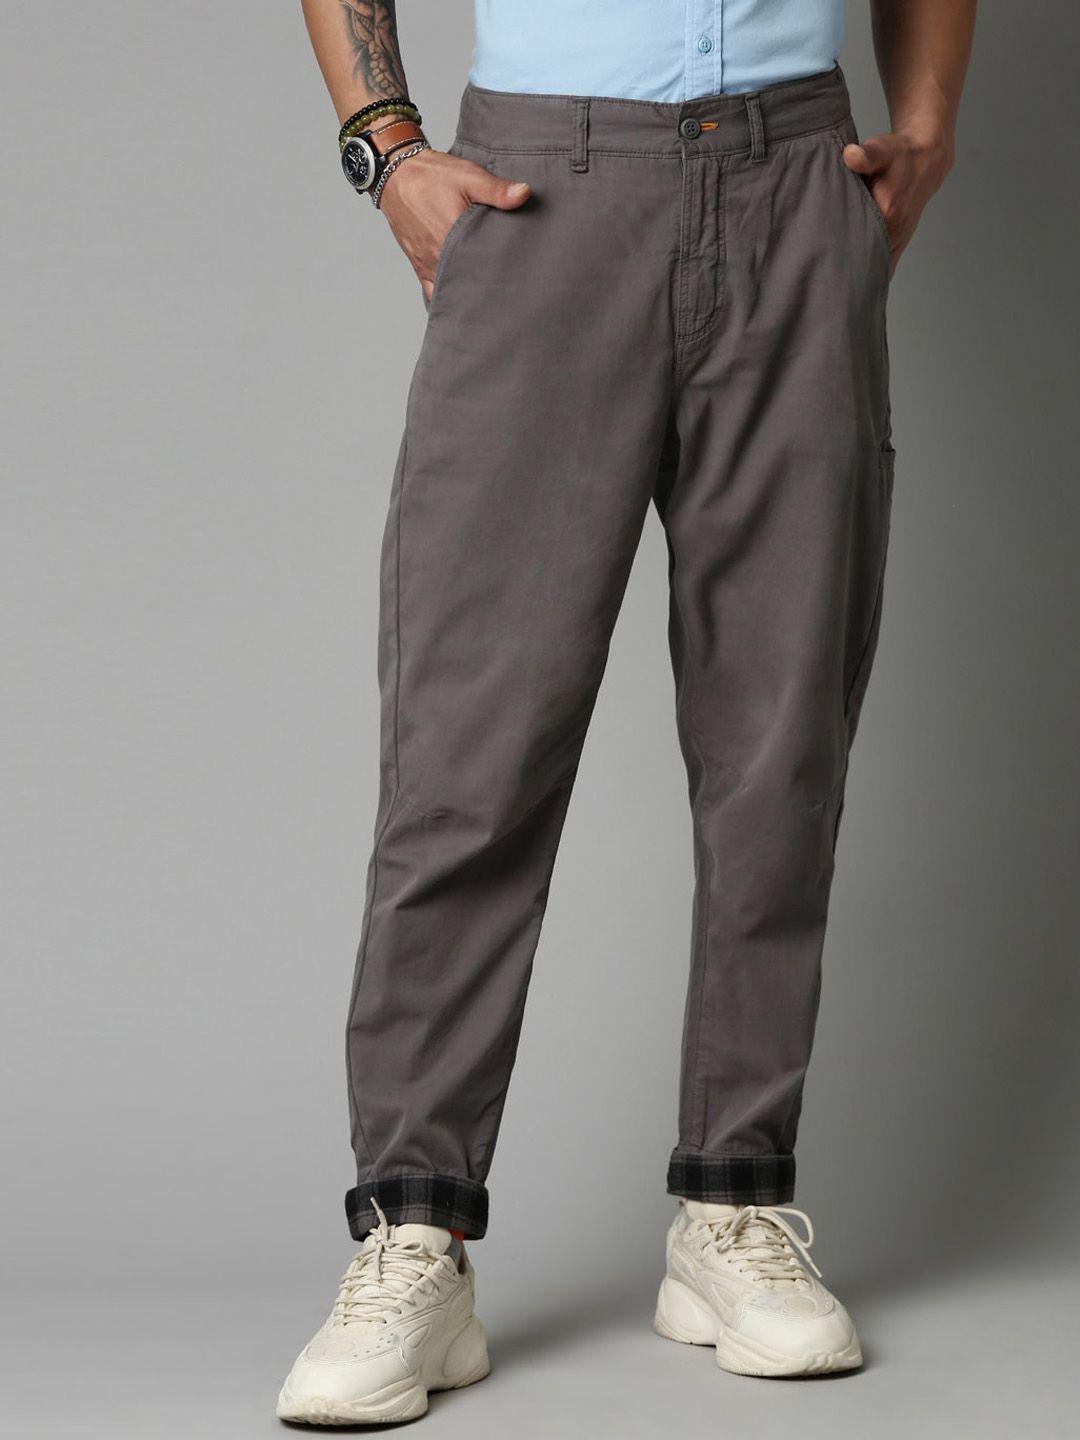 breakbounce-men-charcoal-carrot-fit-cotton-chinos-trousers